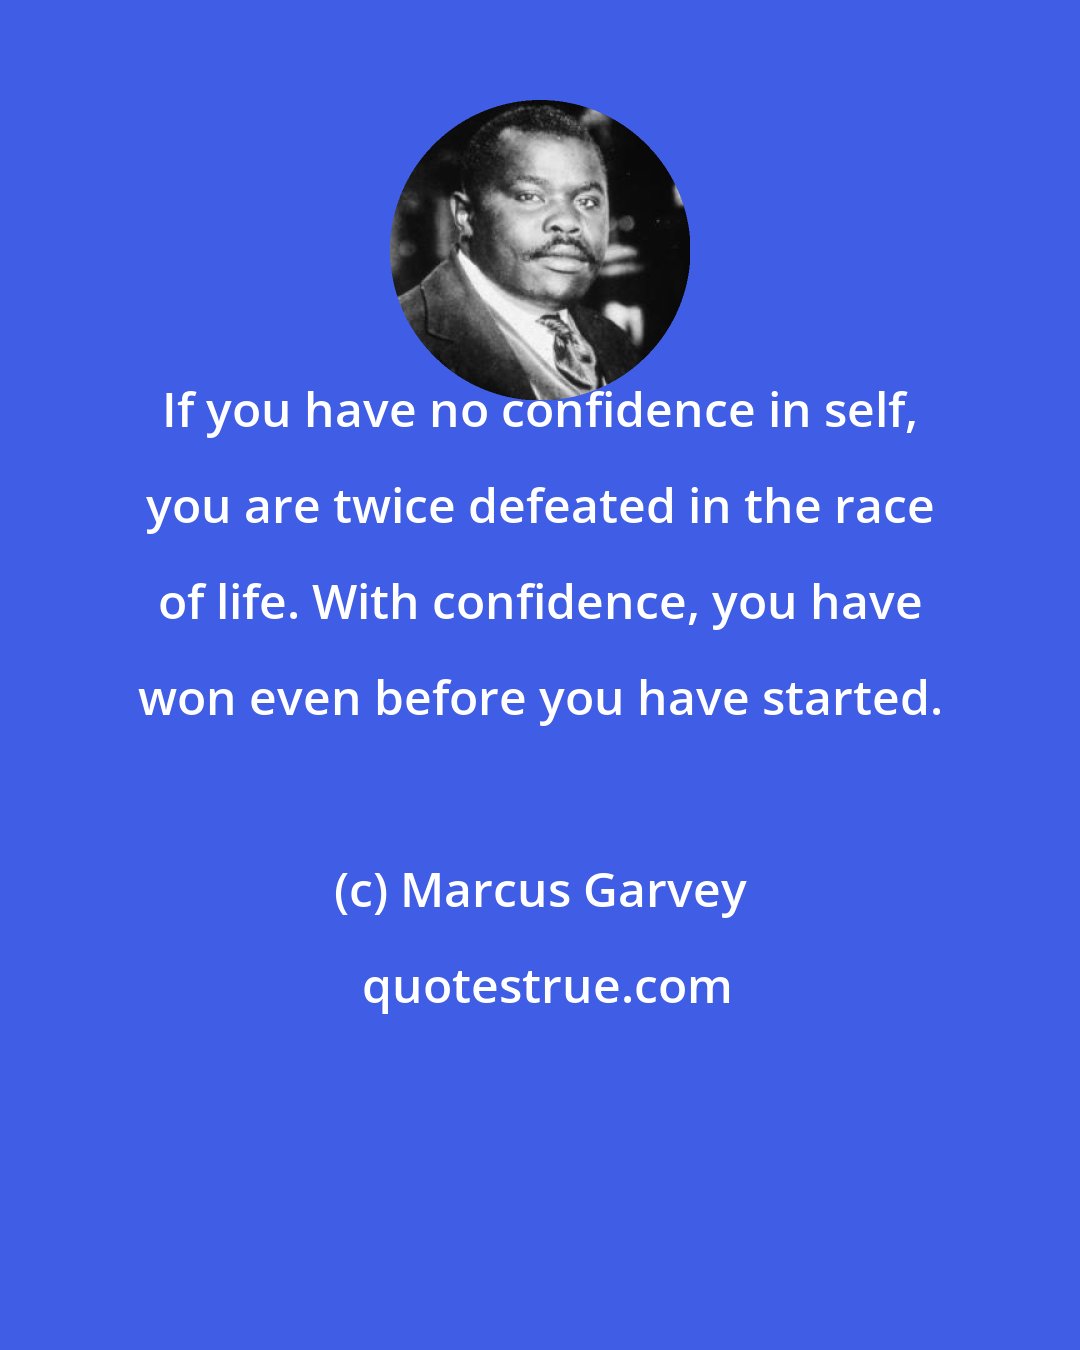 Marcus Garvey: If you have no confidence in self, you are twice defeated in the race of life. With confidence, you have won even before you have started.